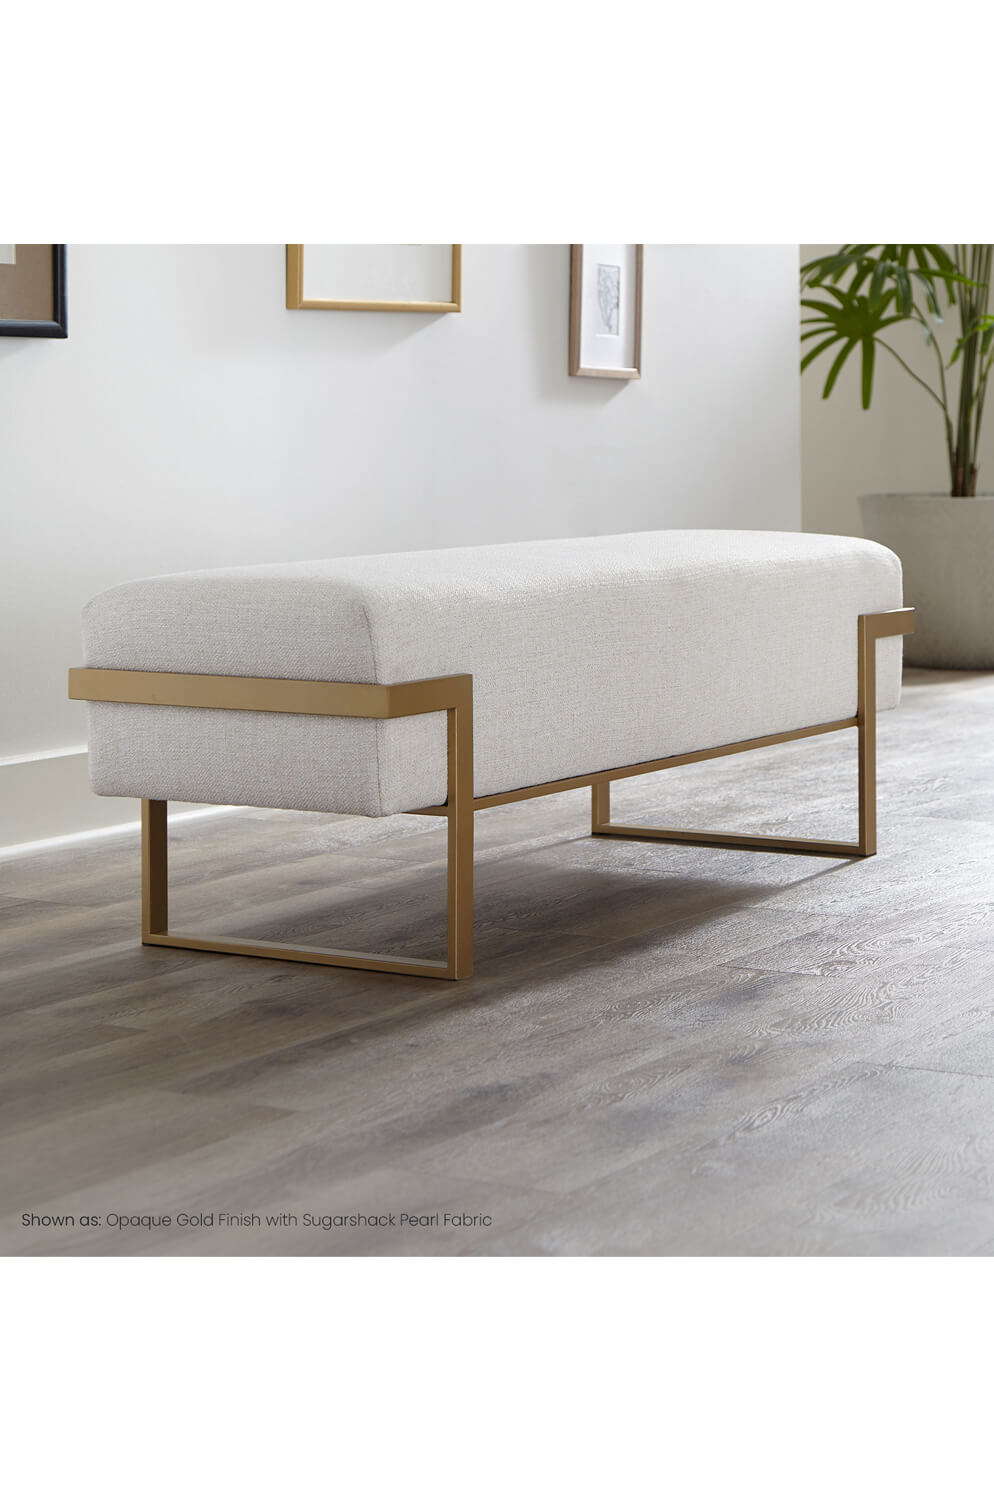 Wesley Allen's Athena Modern Upholstered Bench with Gold Metal Legs and White Fabric